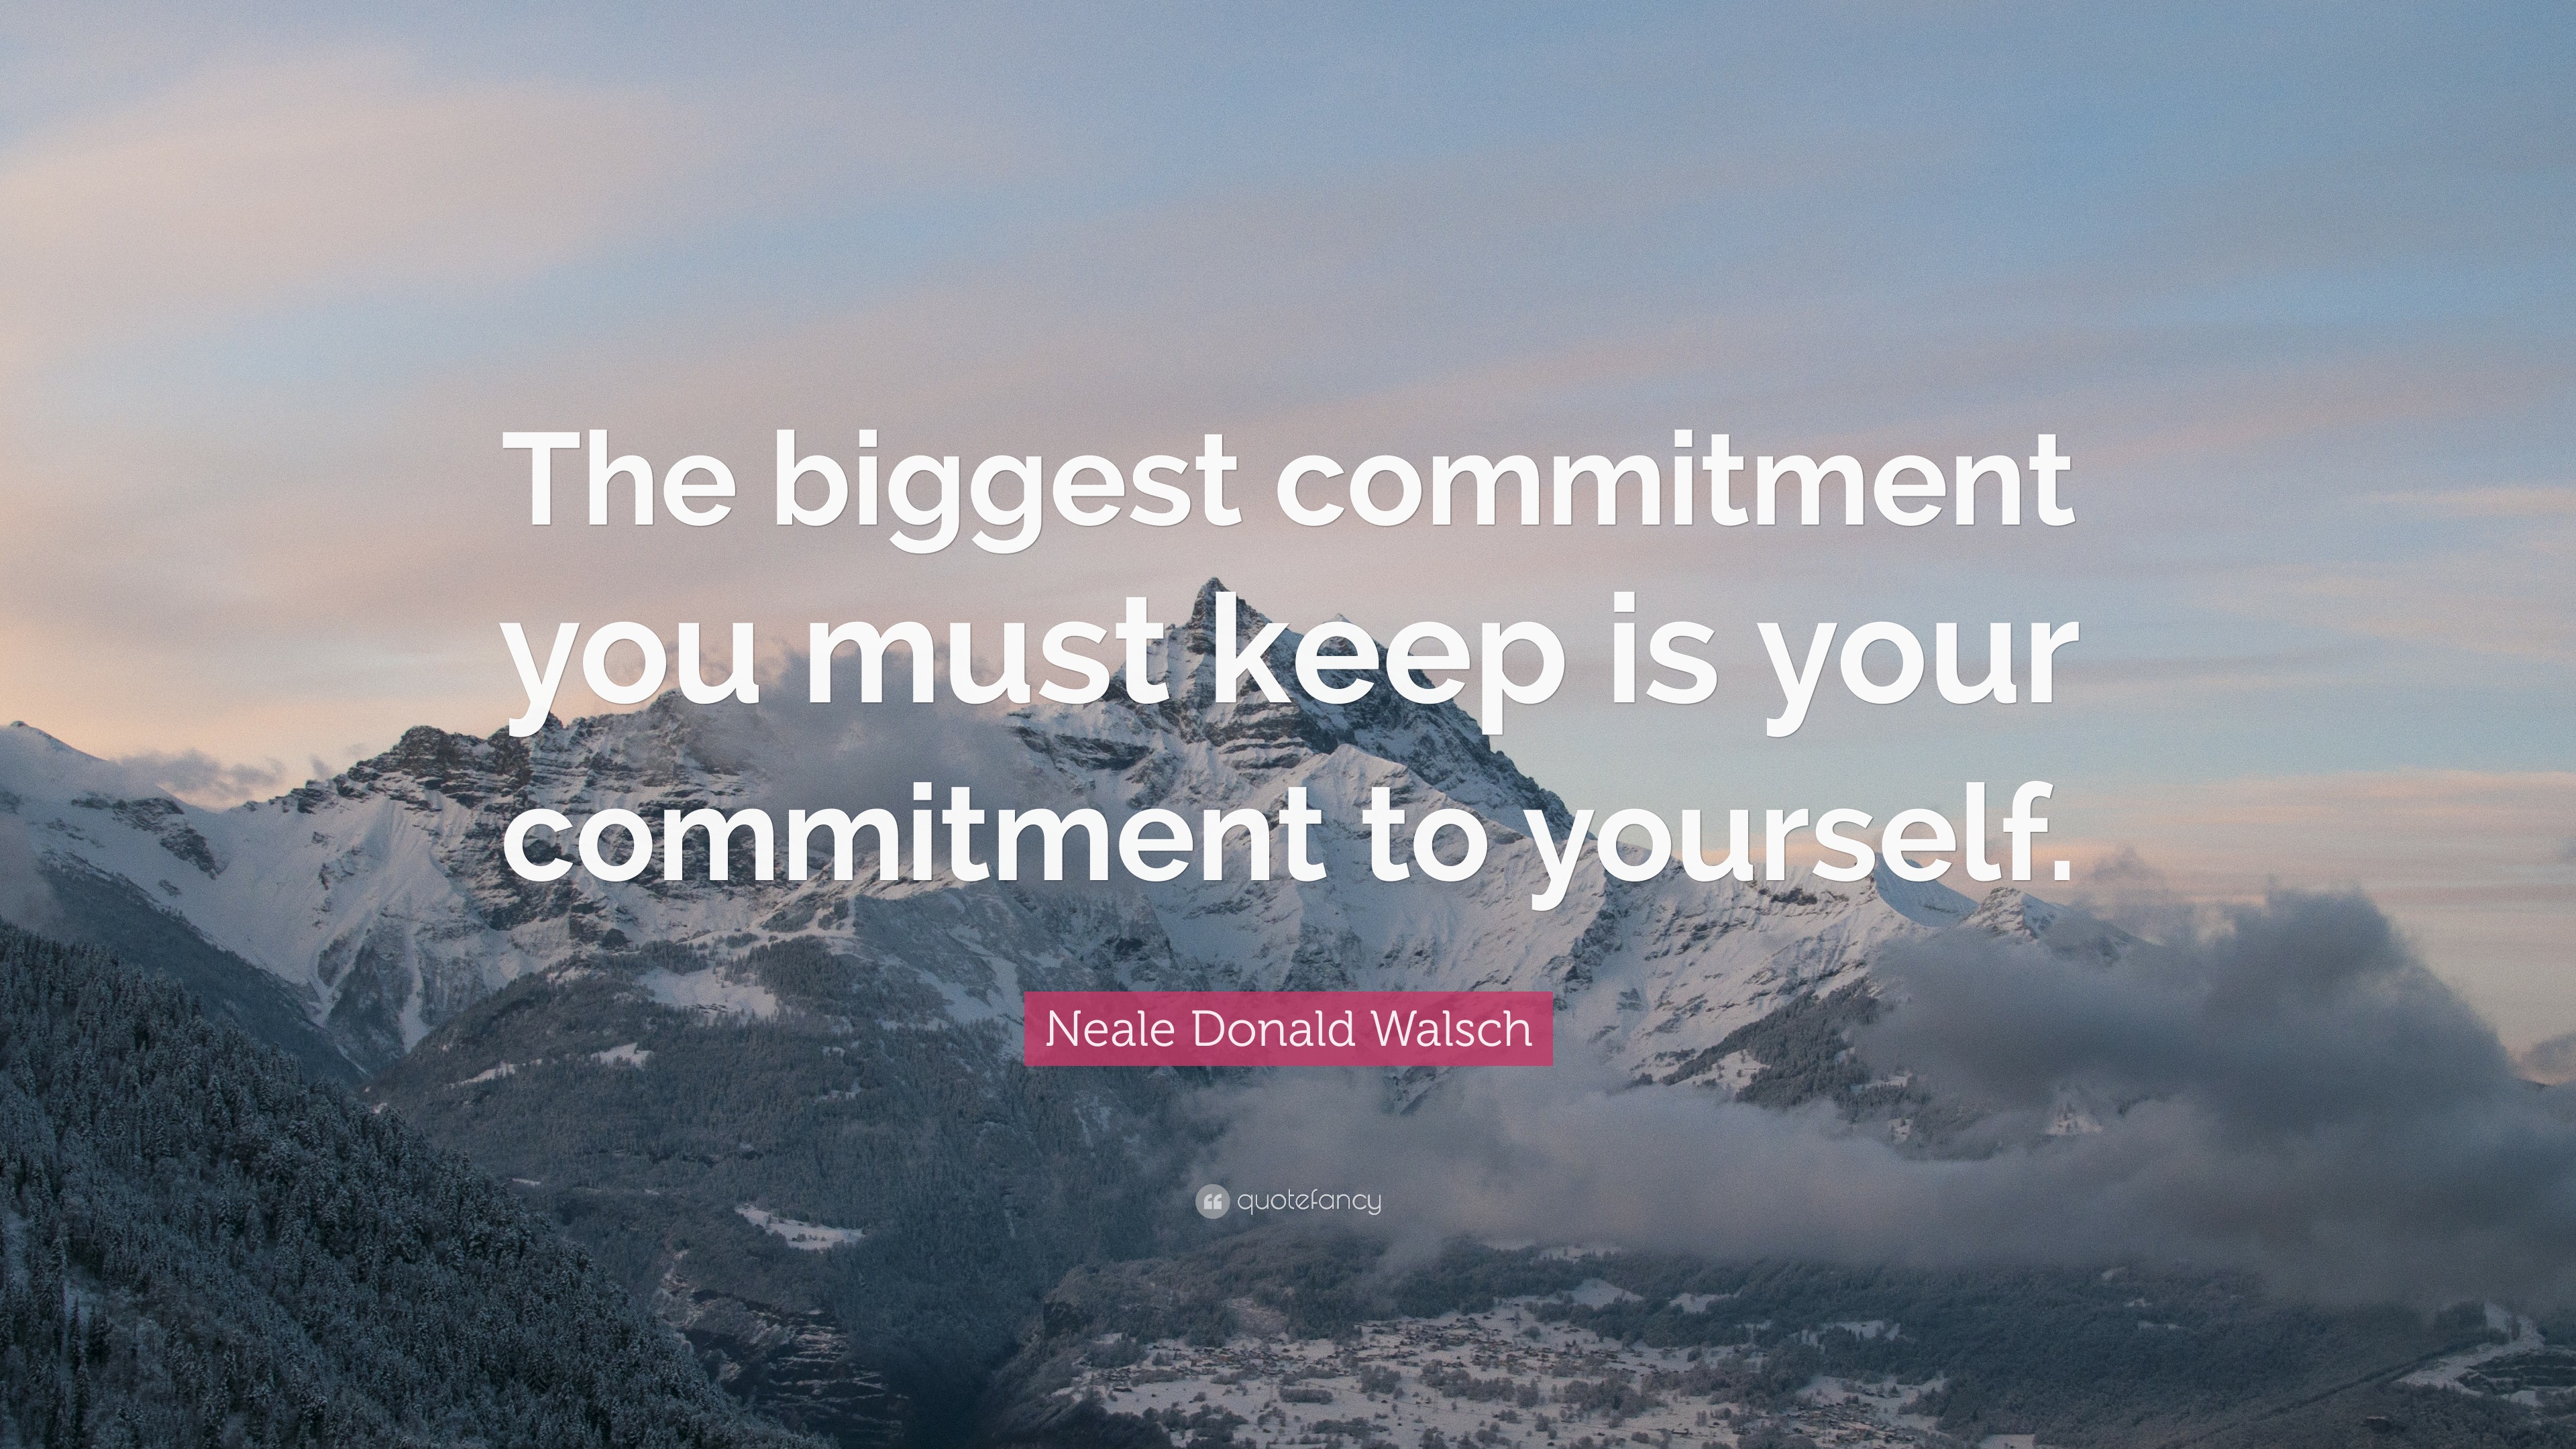 Neale Donald Walsch Quote: “The biggest commitment you must keep is ...